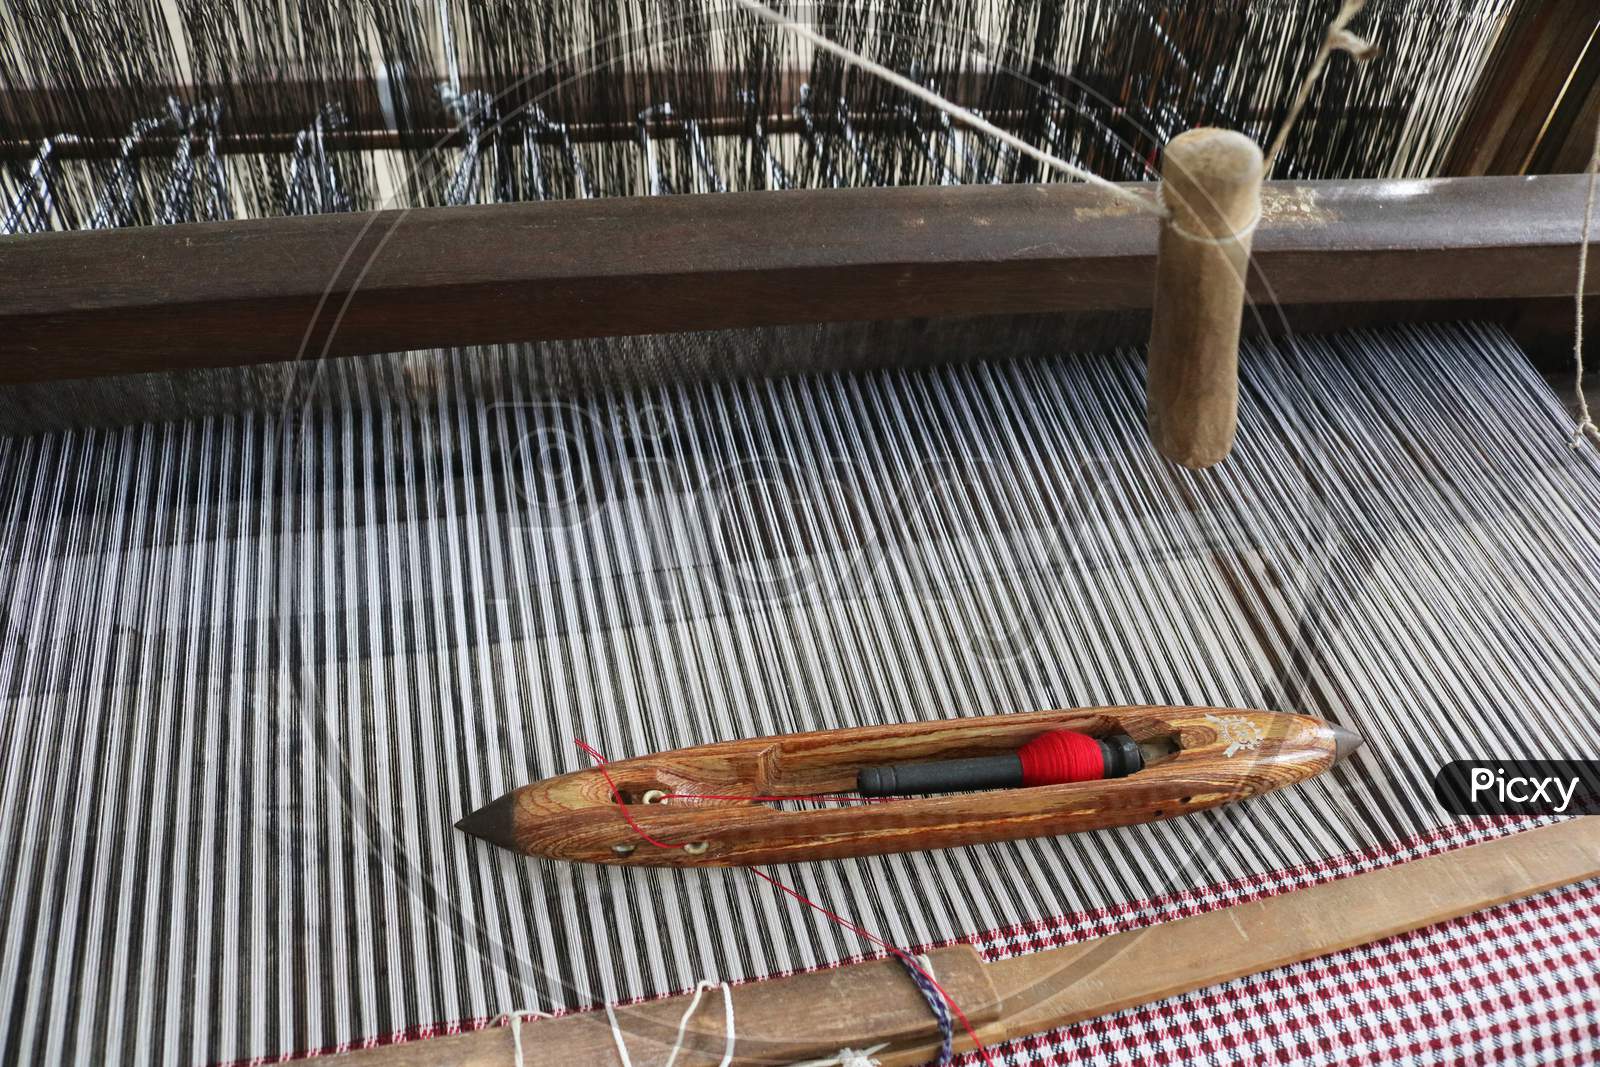 Handloom Shuttles used by the weavers of India.